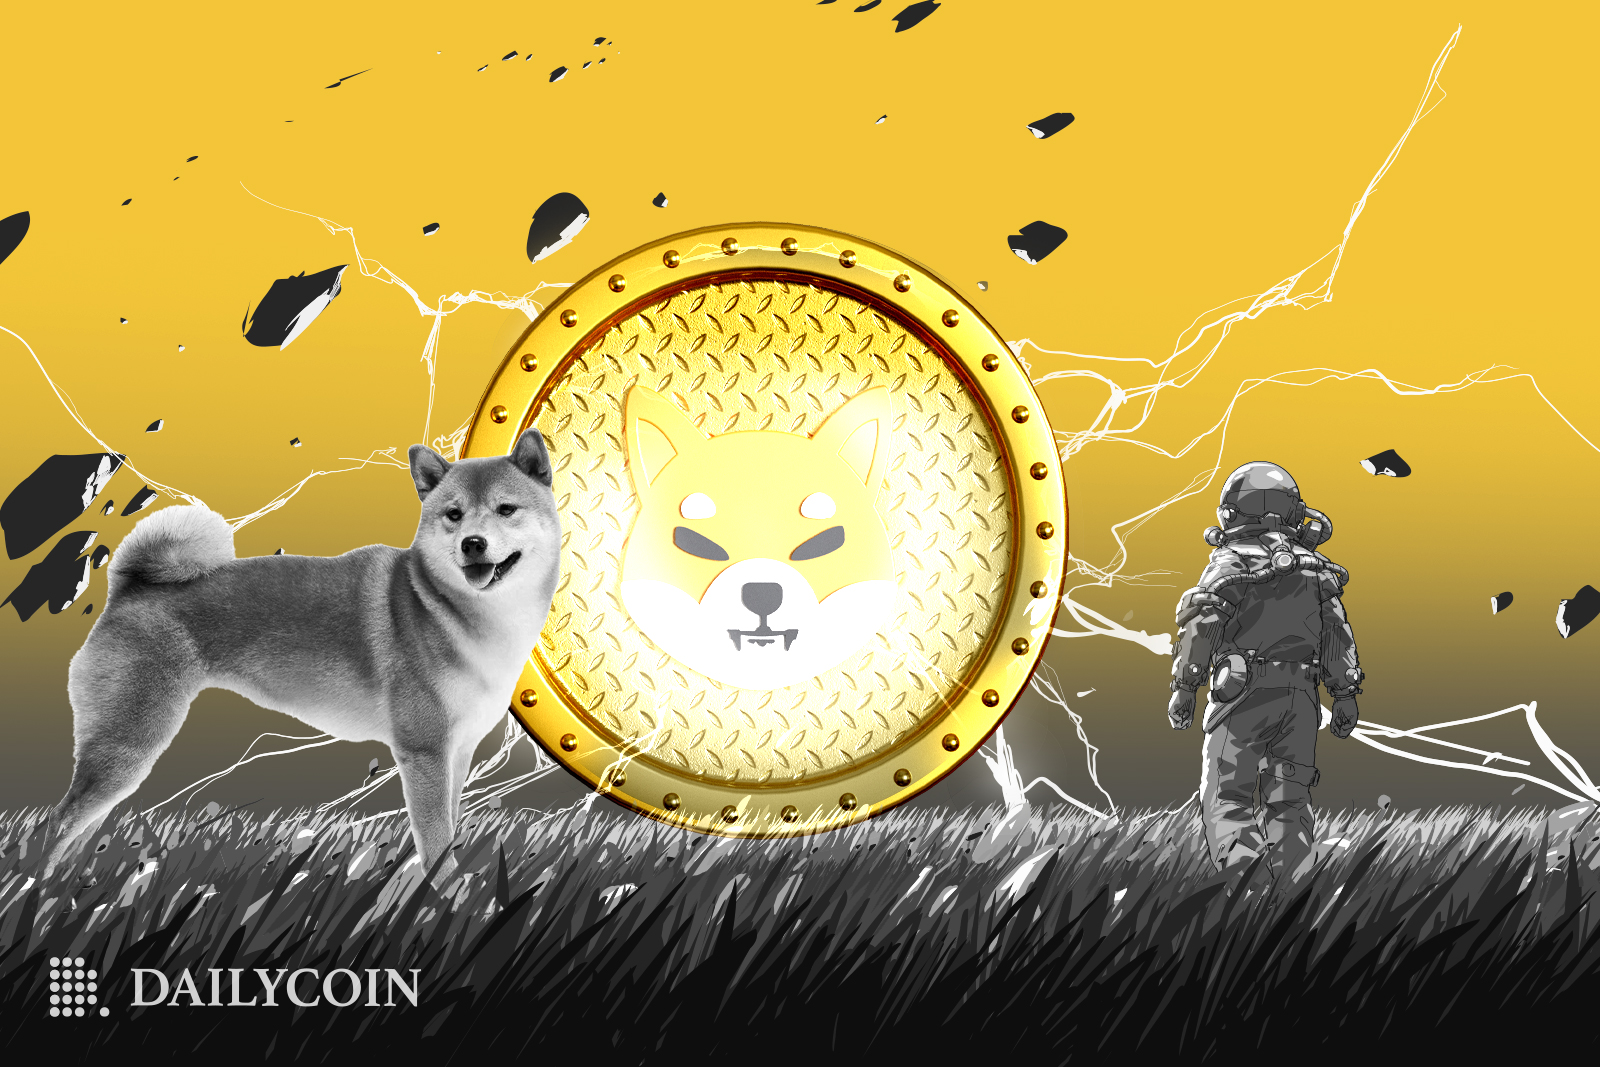 Shiba Inu dog smiling in front of a large golden SHIB coin in a cracked yellow background.